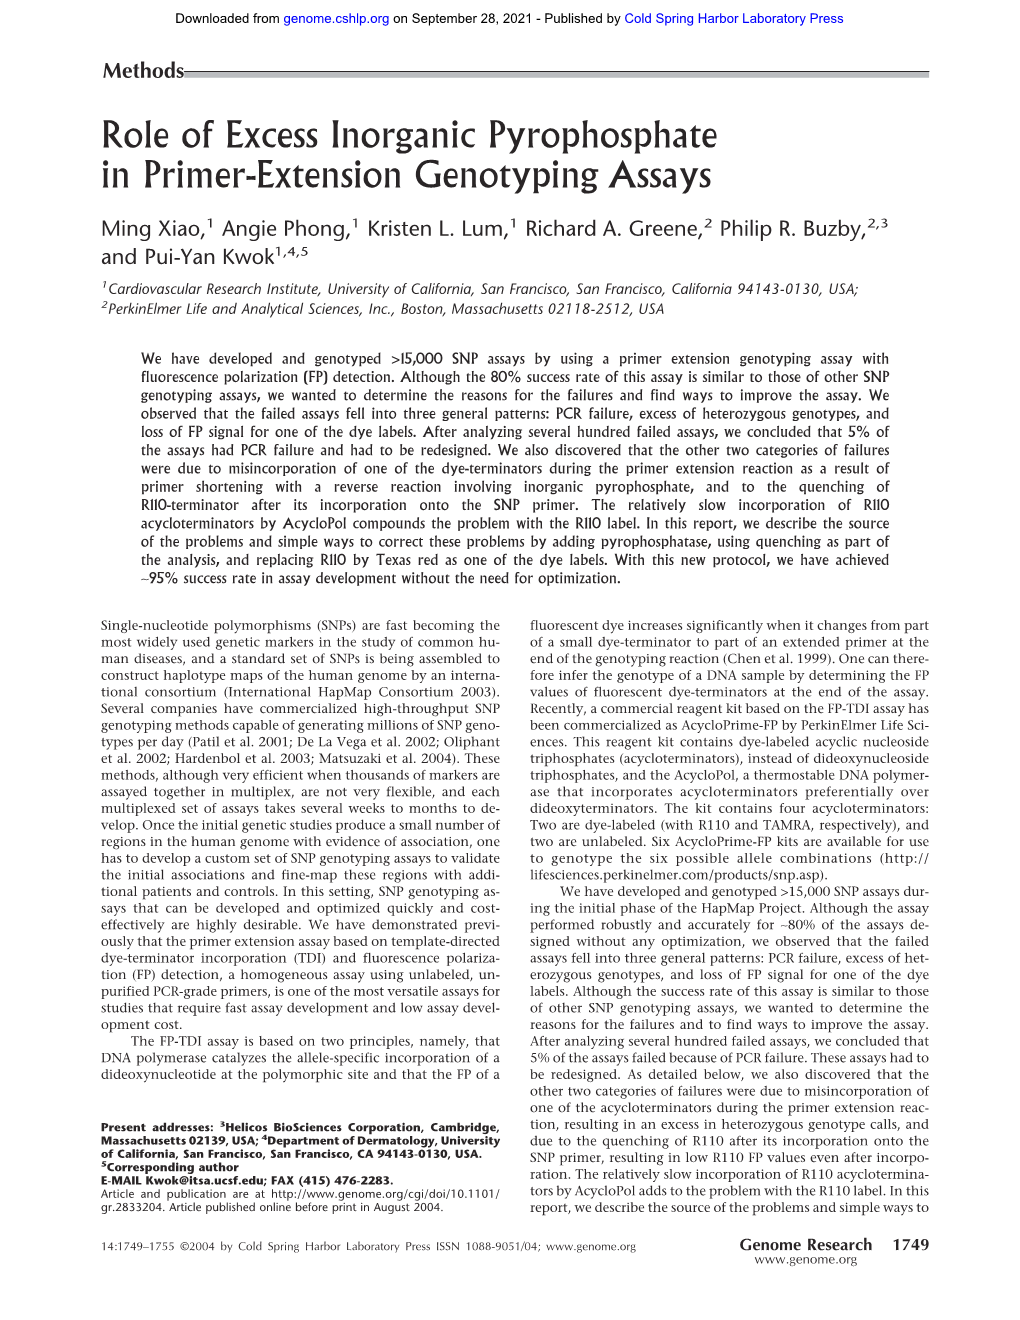 Role of Excess Inorganic Pyrophosphate in Primer-Extension Genotyping Assays